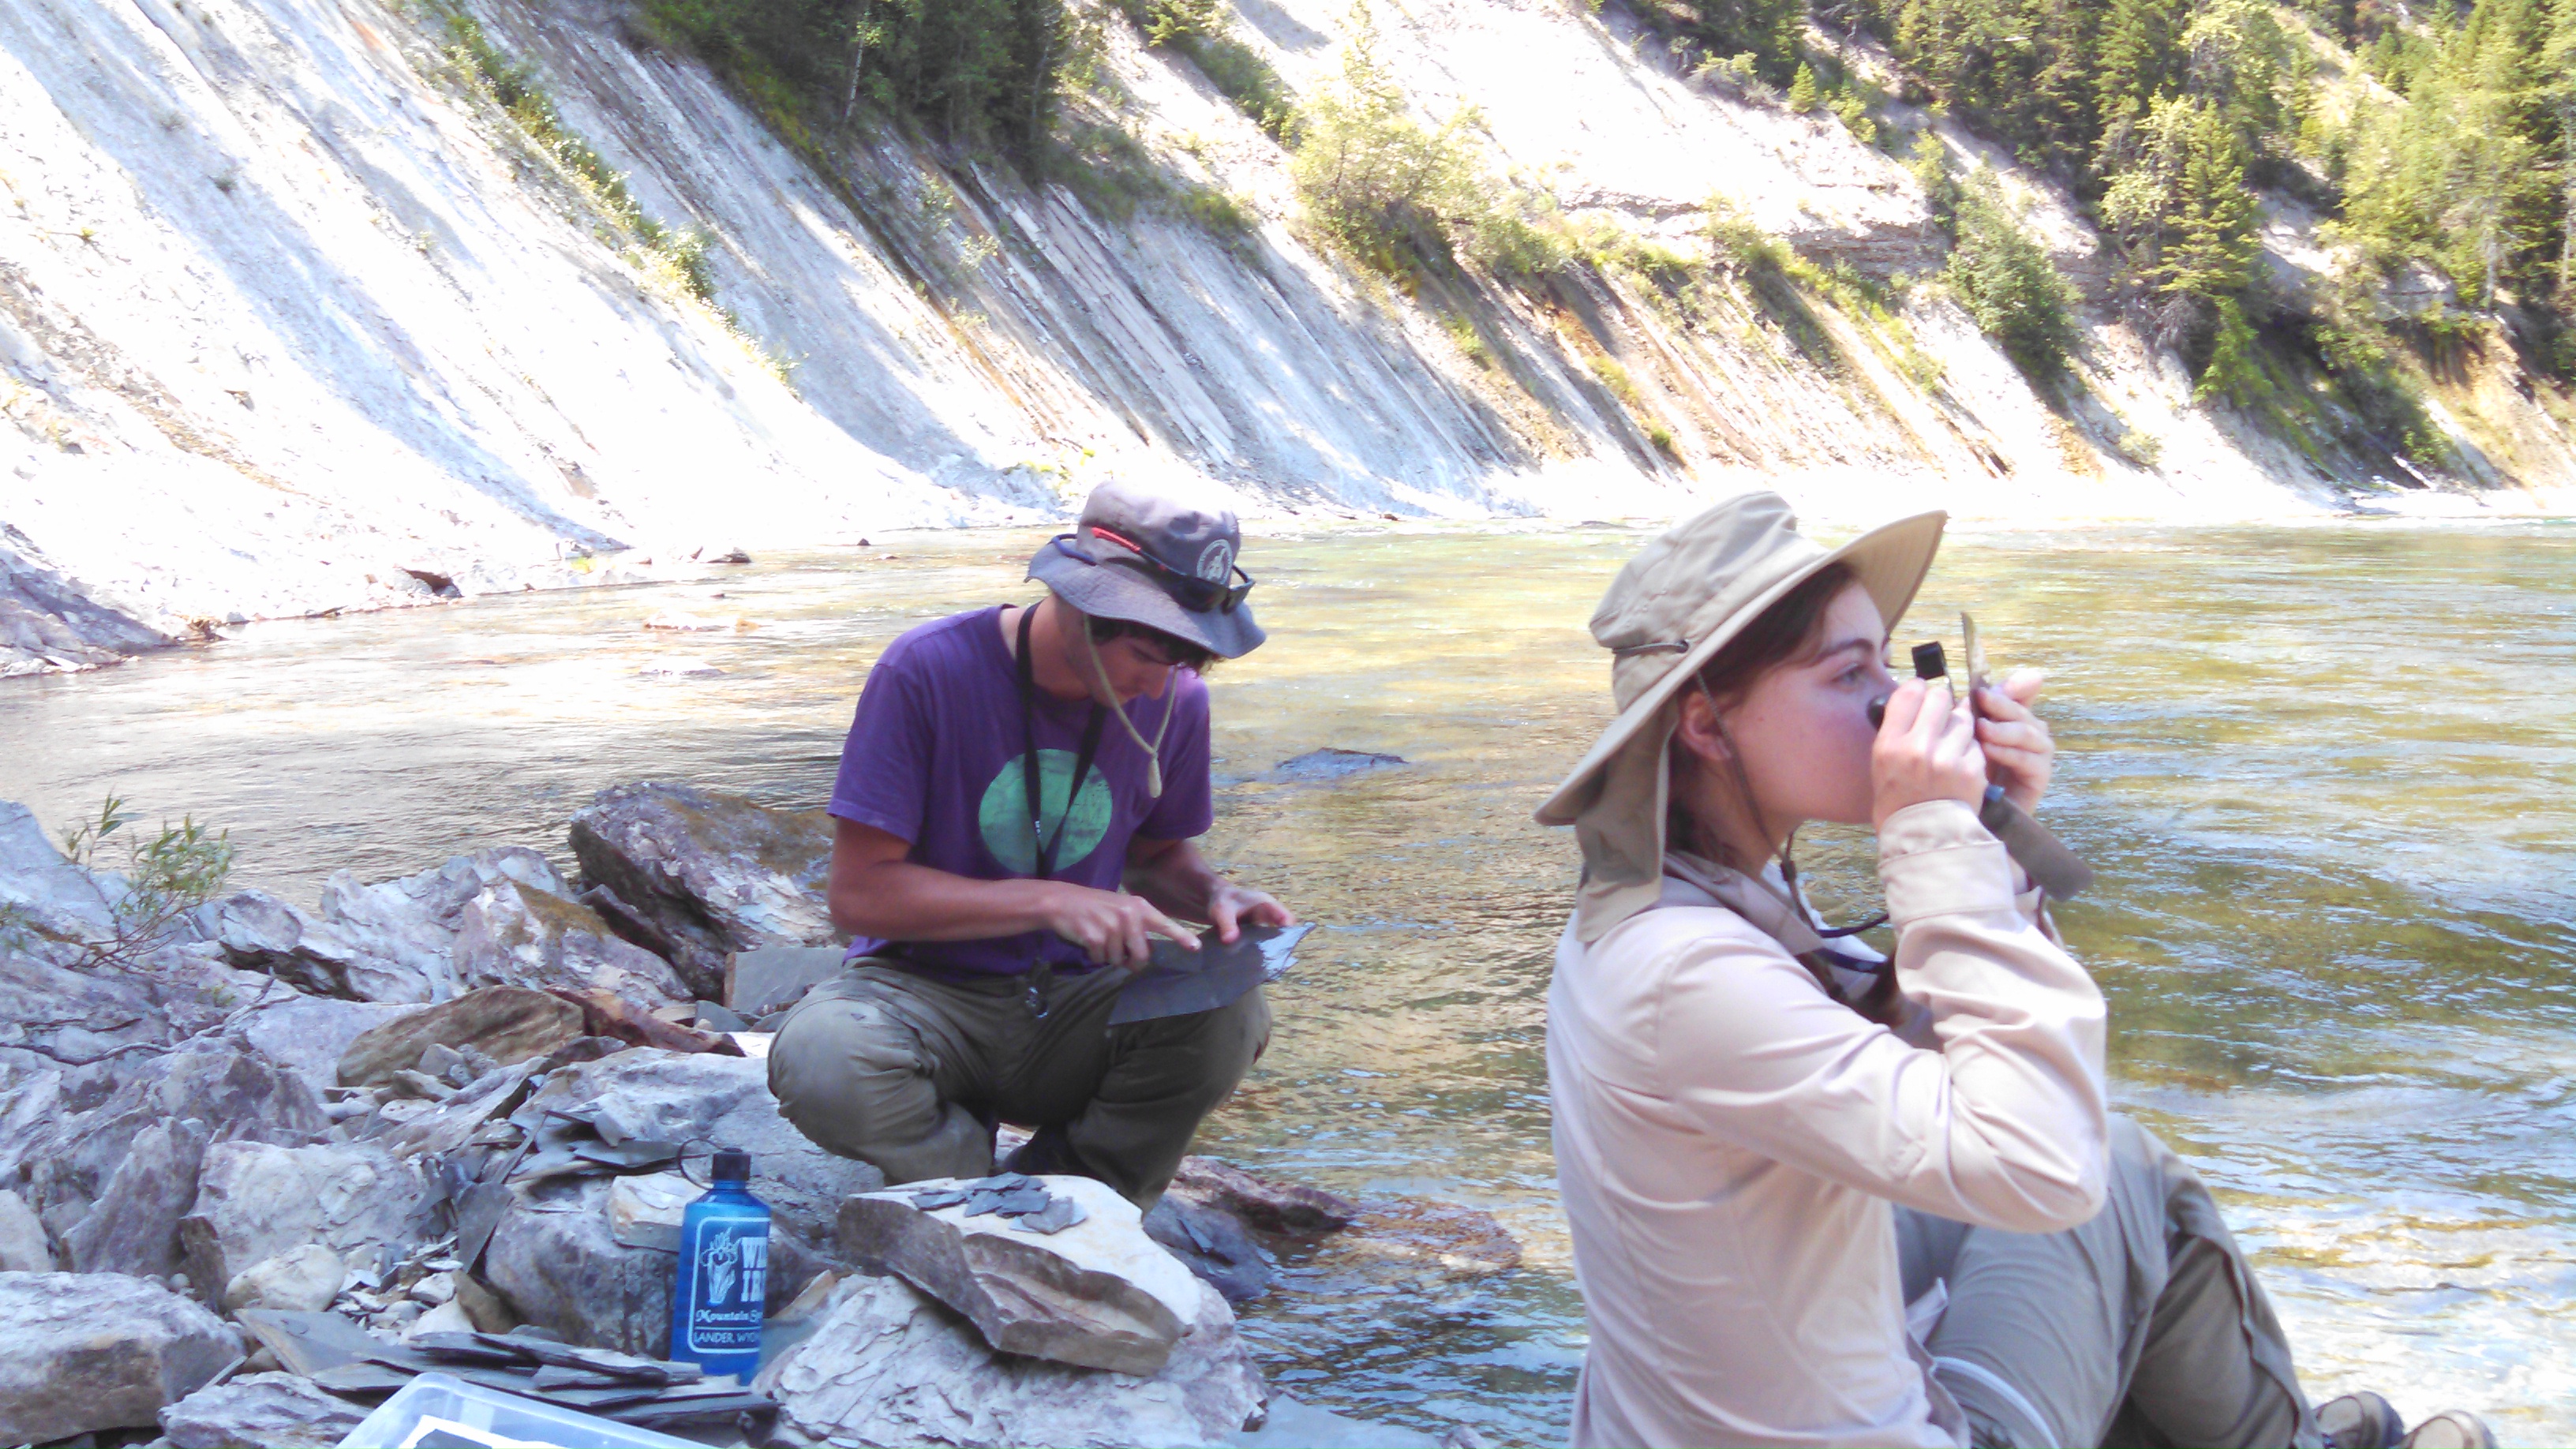 Searching for insect fossils in the Kishenehn Formation, northwestern Montana